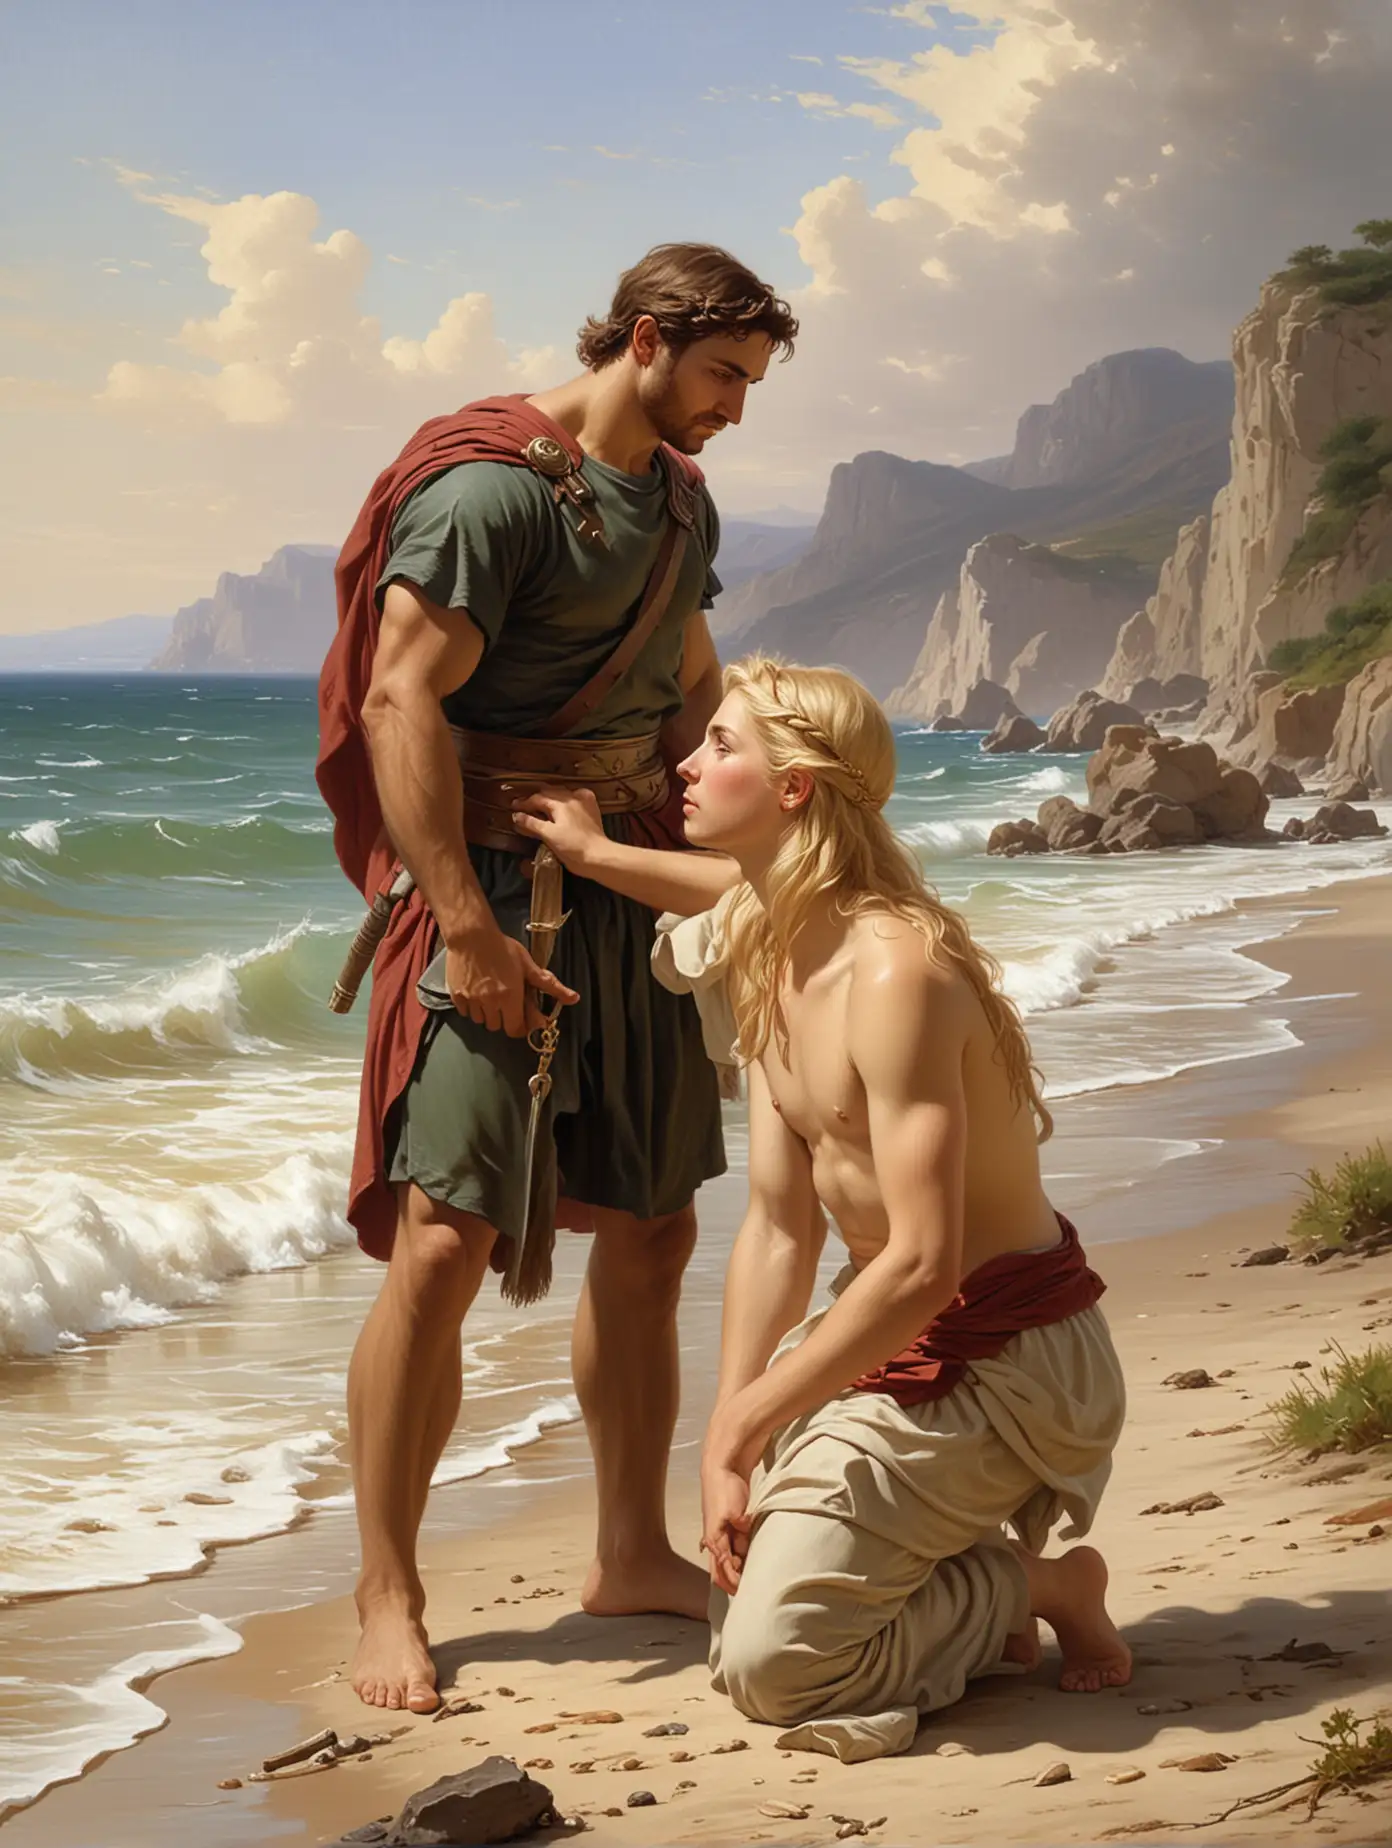 Write a short description of an image depicting the handsome strong Greek soldier Achilles returning the young blond boy to his mother who is kneeling on the seashore. The image is to be rendered in the style of artists William adolphe Bougereau.